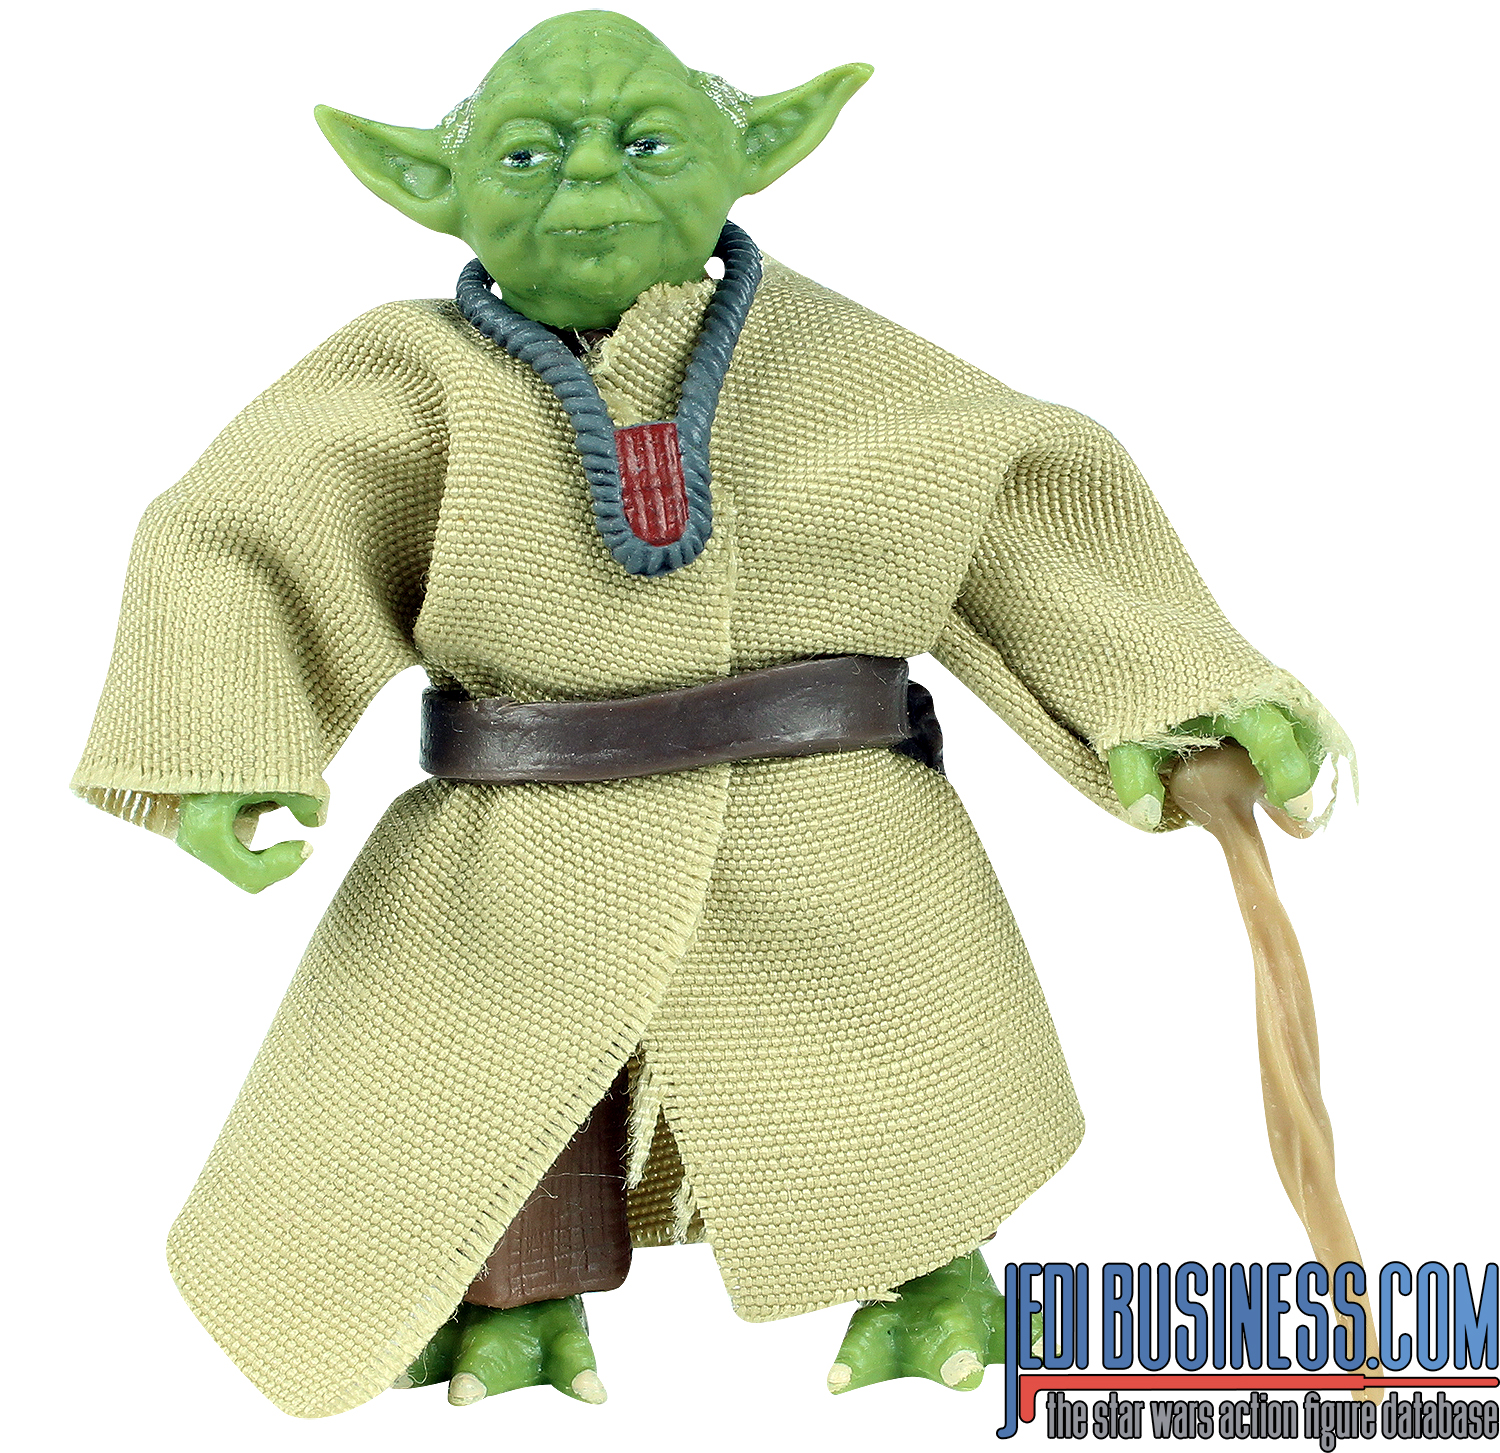 Yoda Cave Of Evil 3-Pack